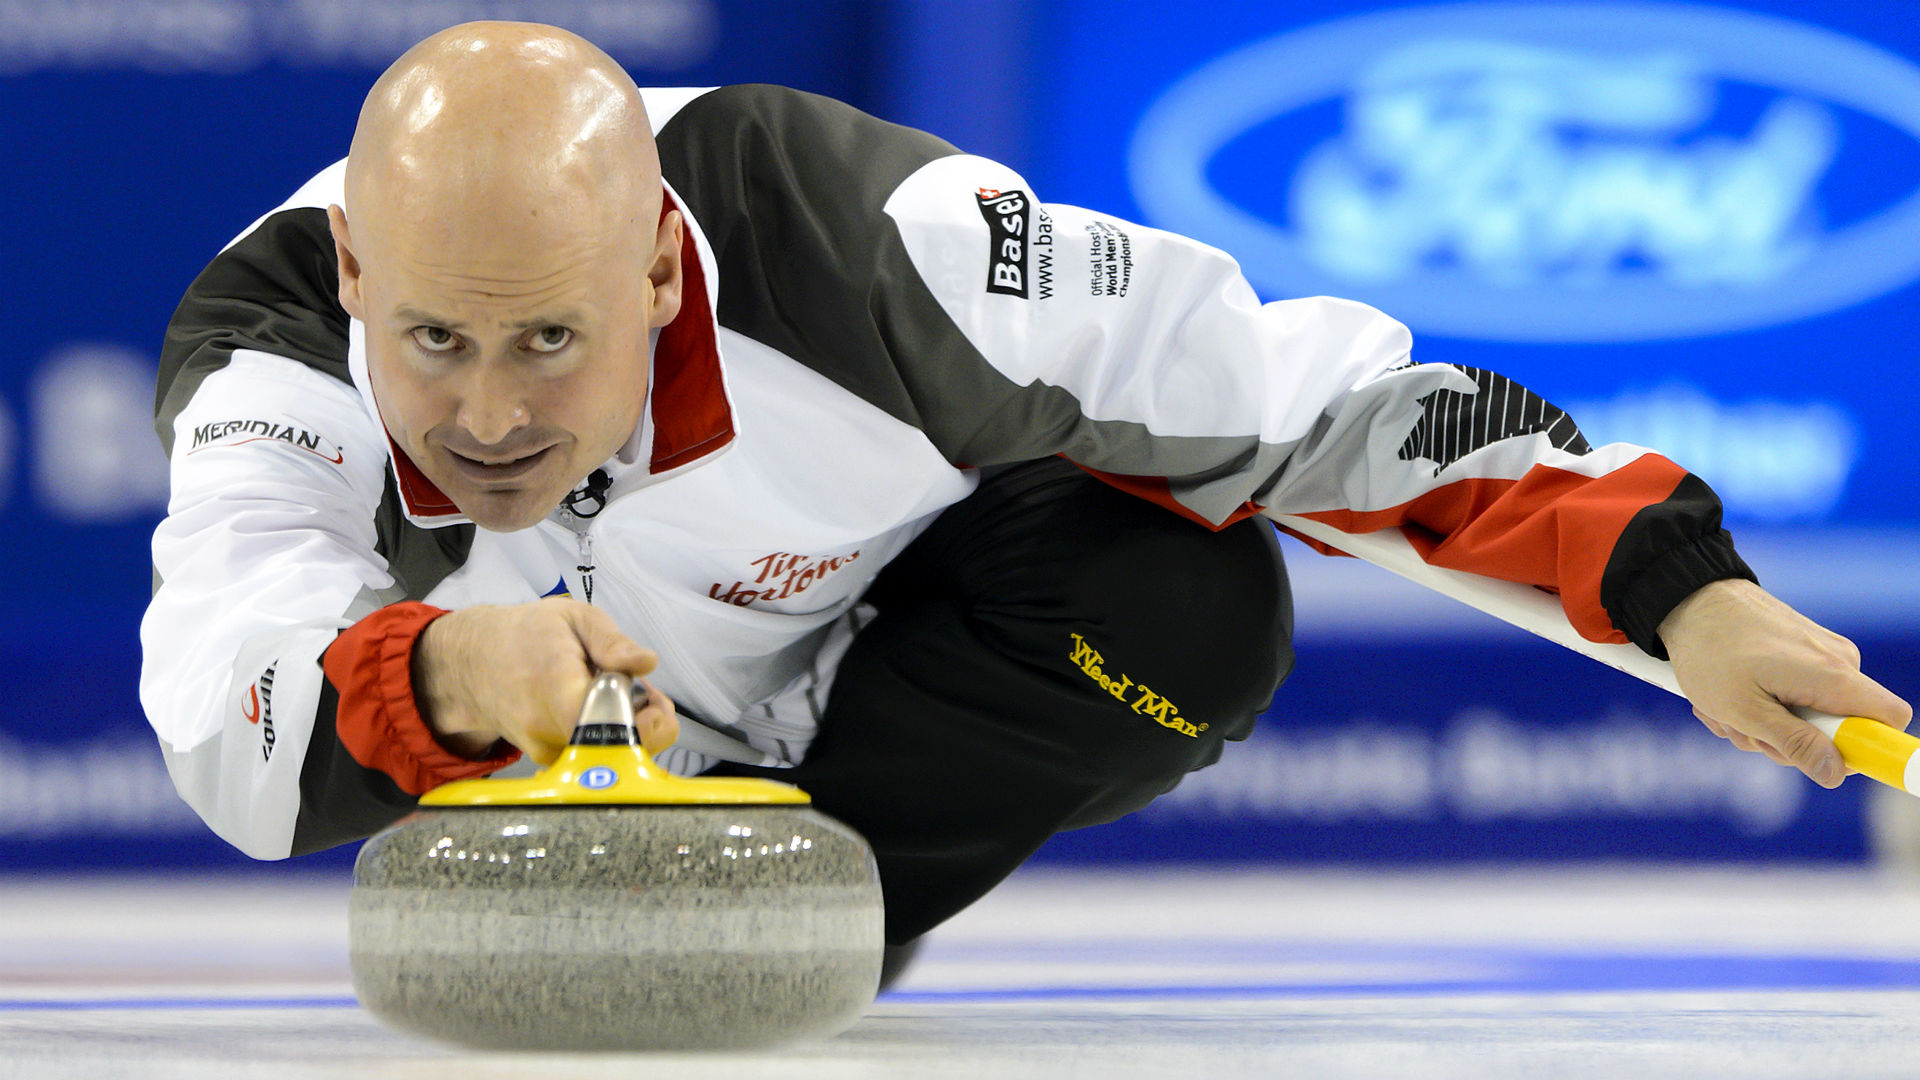 Curling at the 2018 Winter Olympics: Full schedule, medal contenders, how to watch live